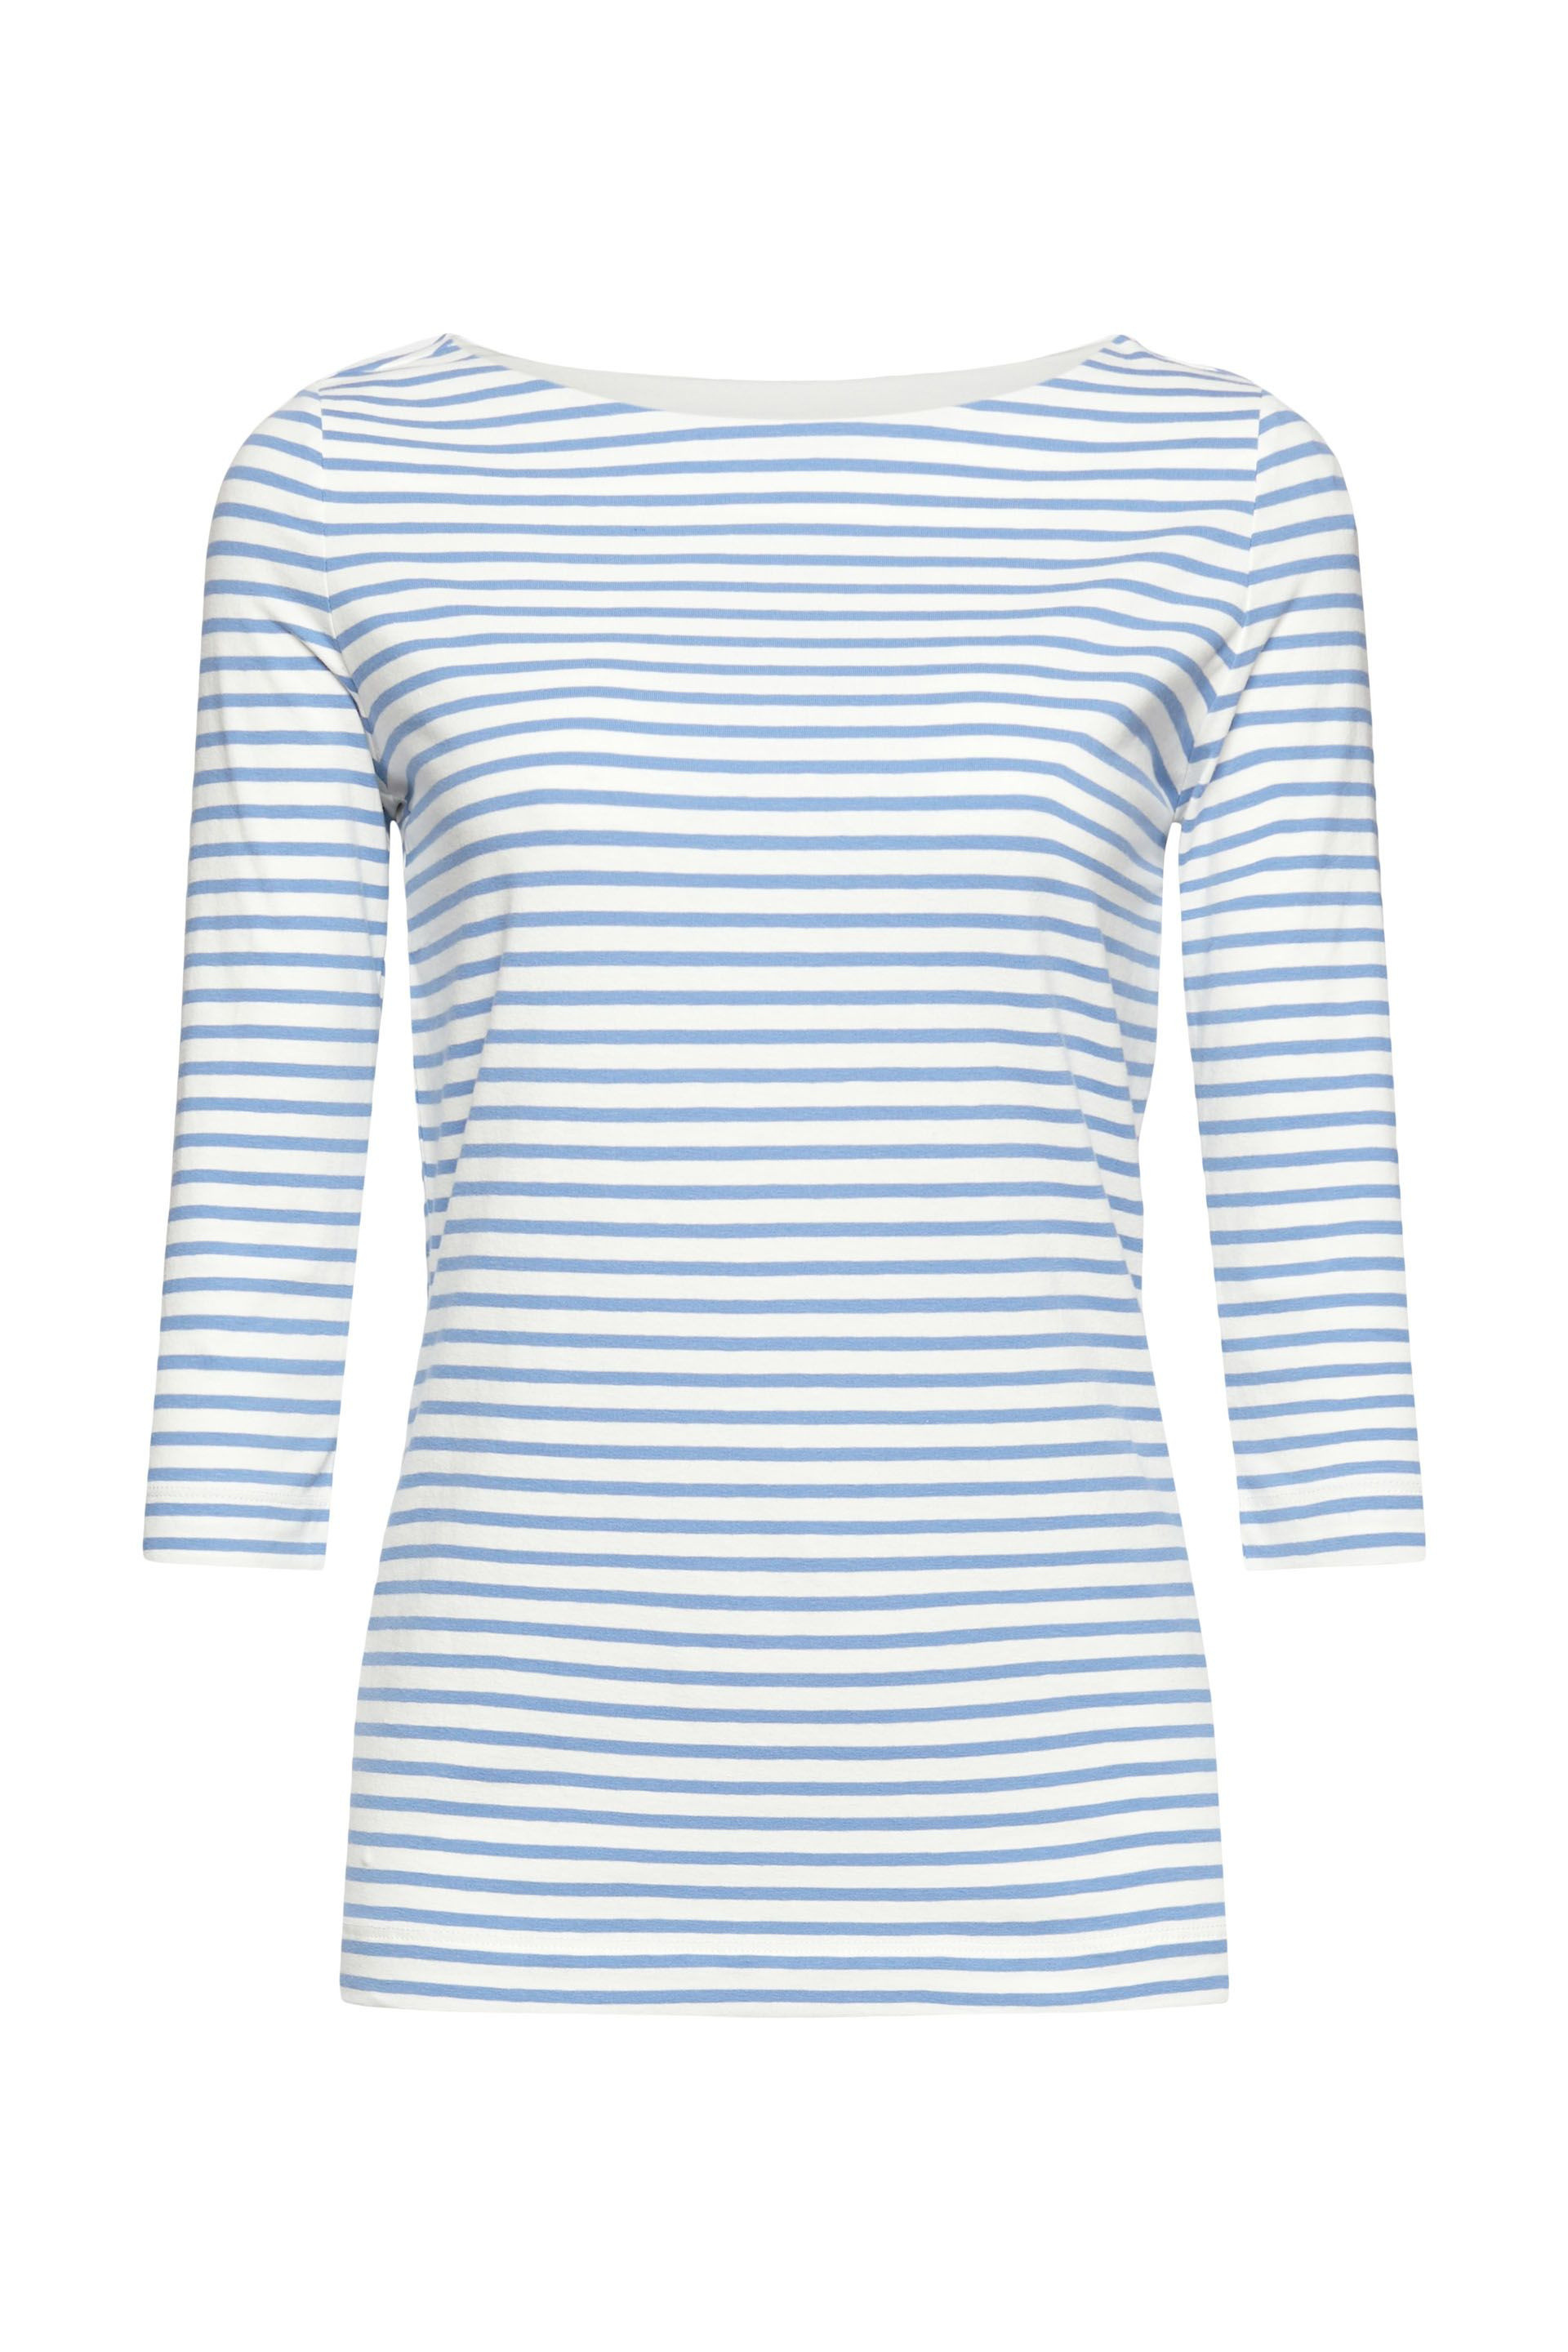 Striped T-shirt with three-quarter sleeves, White, large image number 0